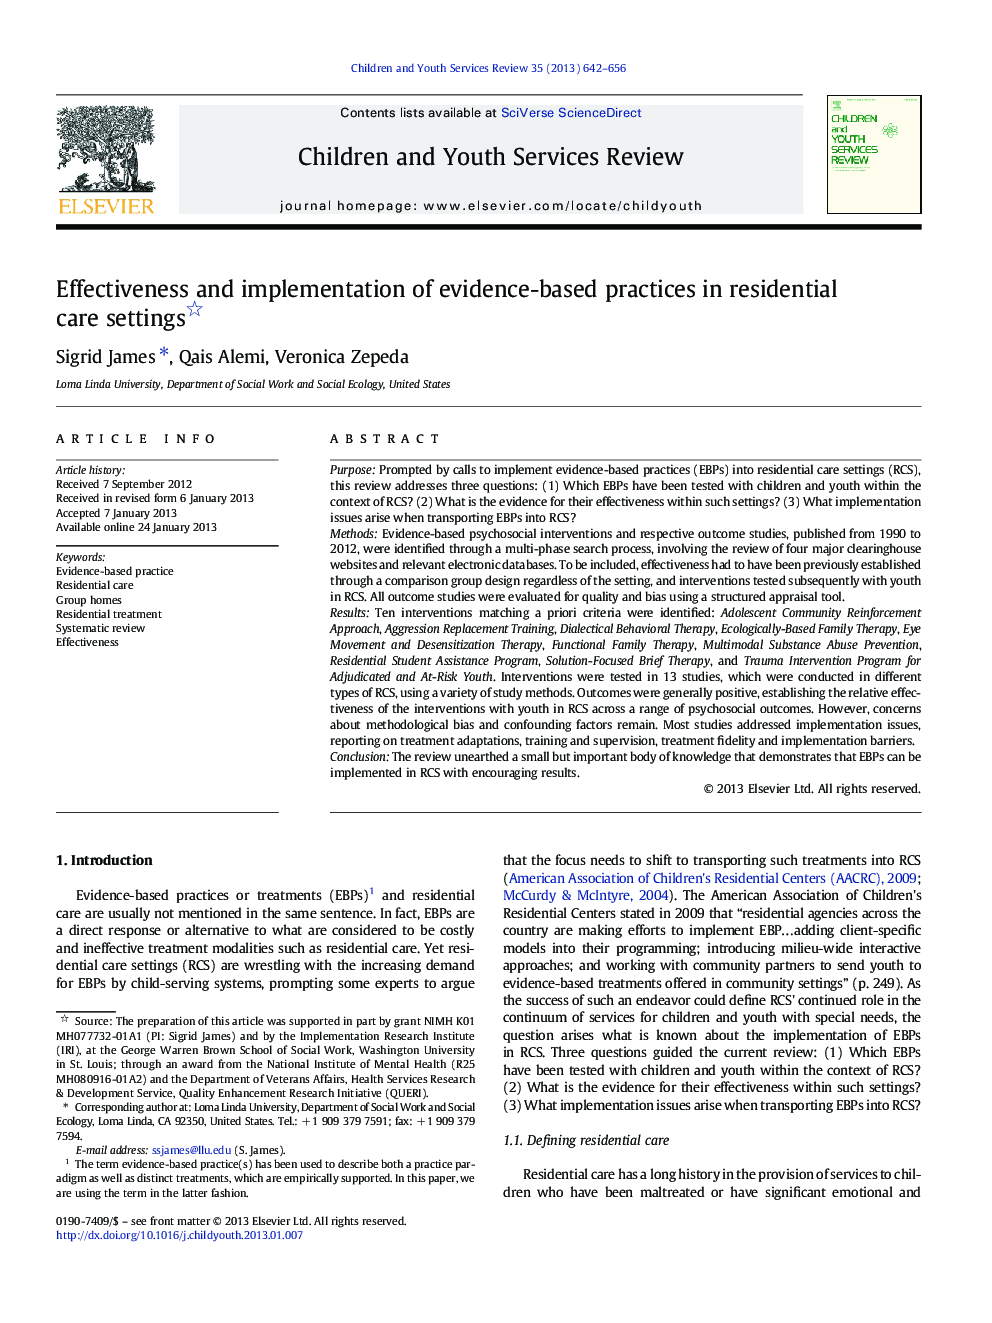 Effectiveness and implementation of evidence-based practices in residential care settings 